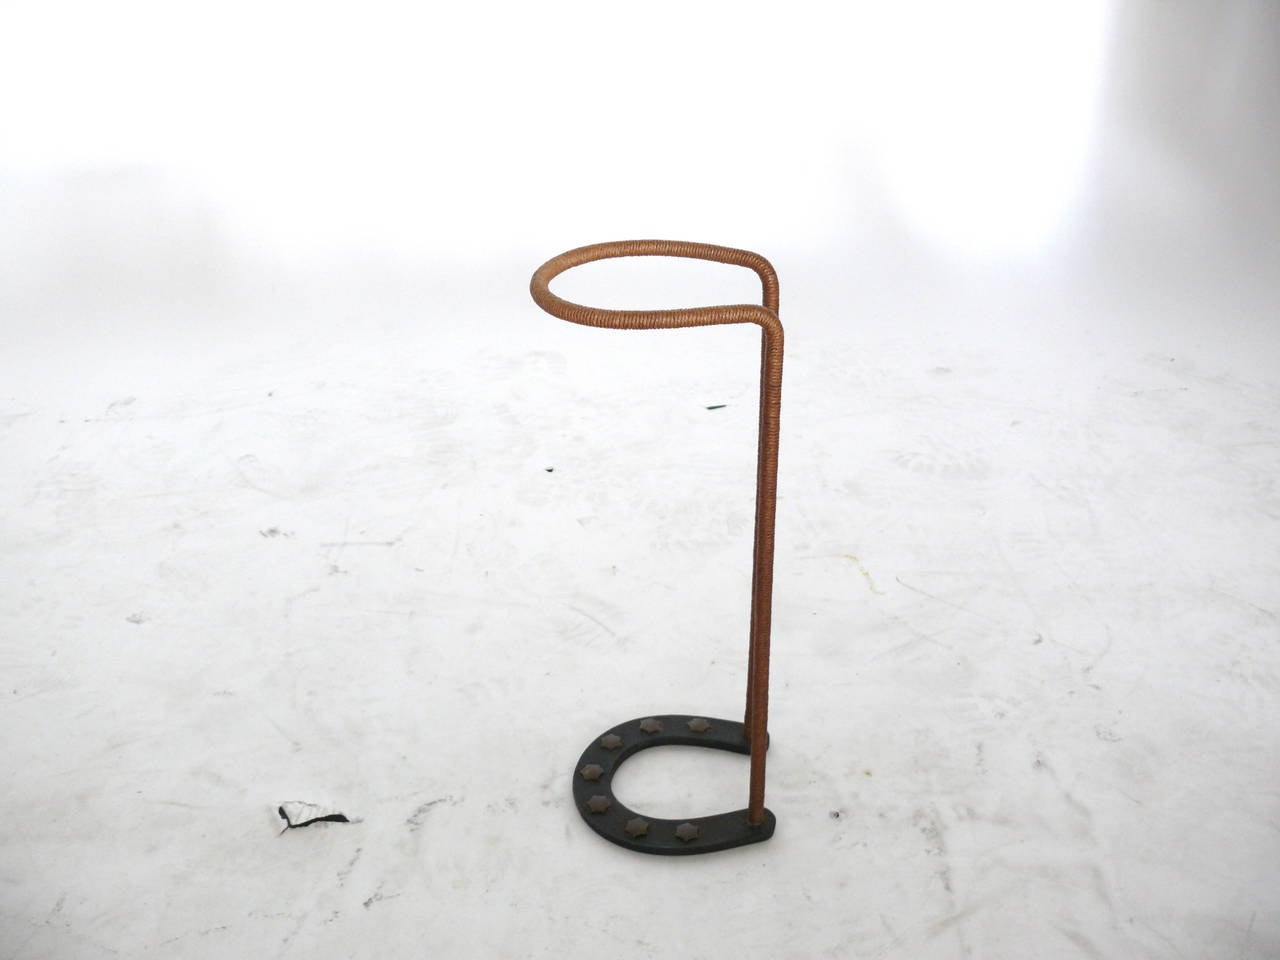 Handsome umbrella stand by Jacques Adnet. Horseshoe base with 7 metal stars affixed. Hemp wrapped frame completes the stand. Excellent vintage condition. Very unique piece.